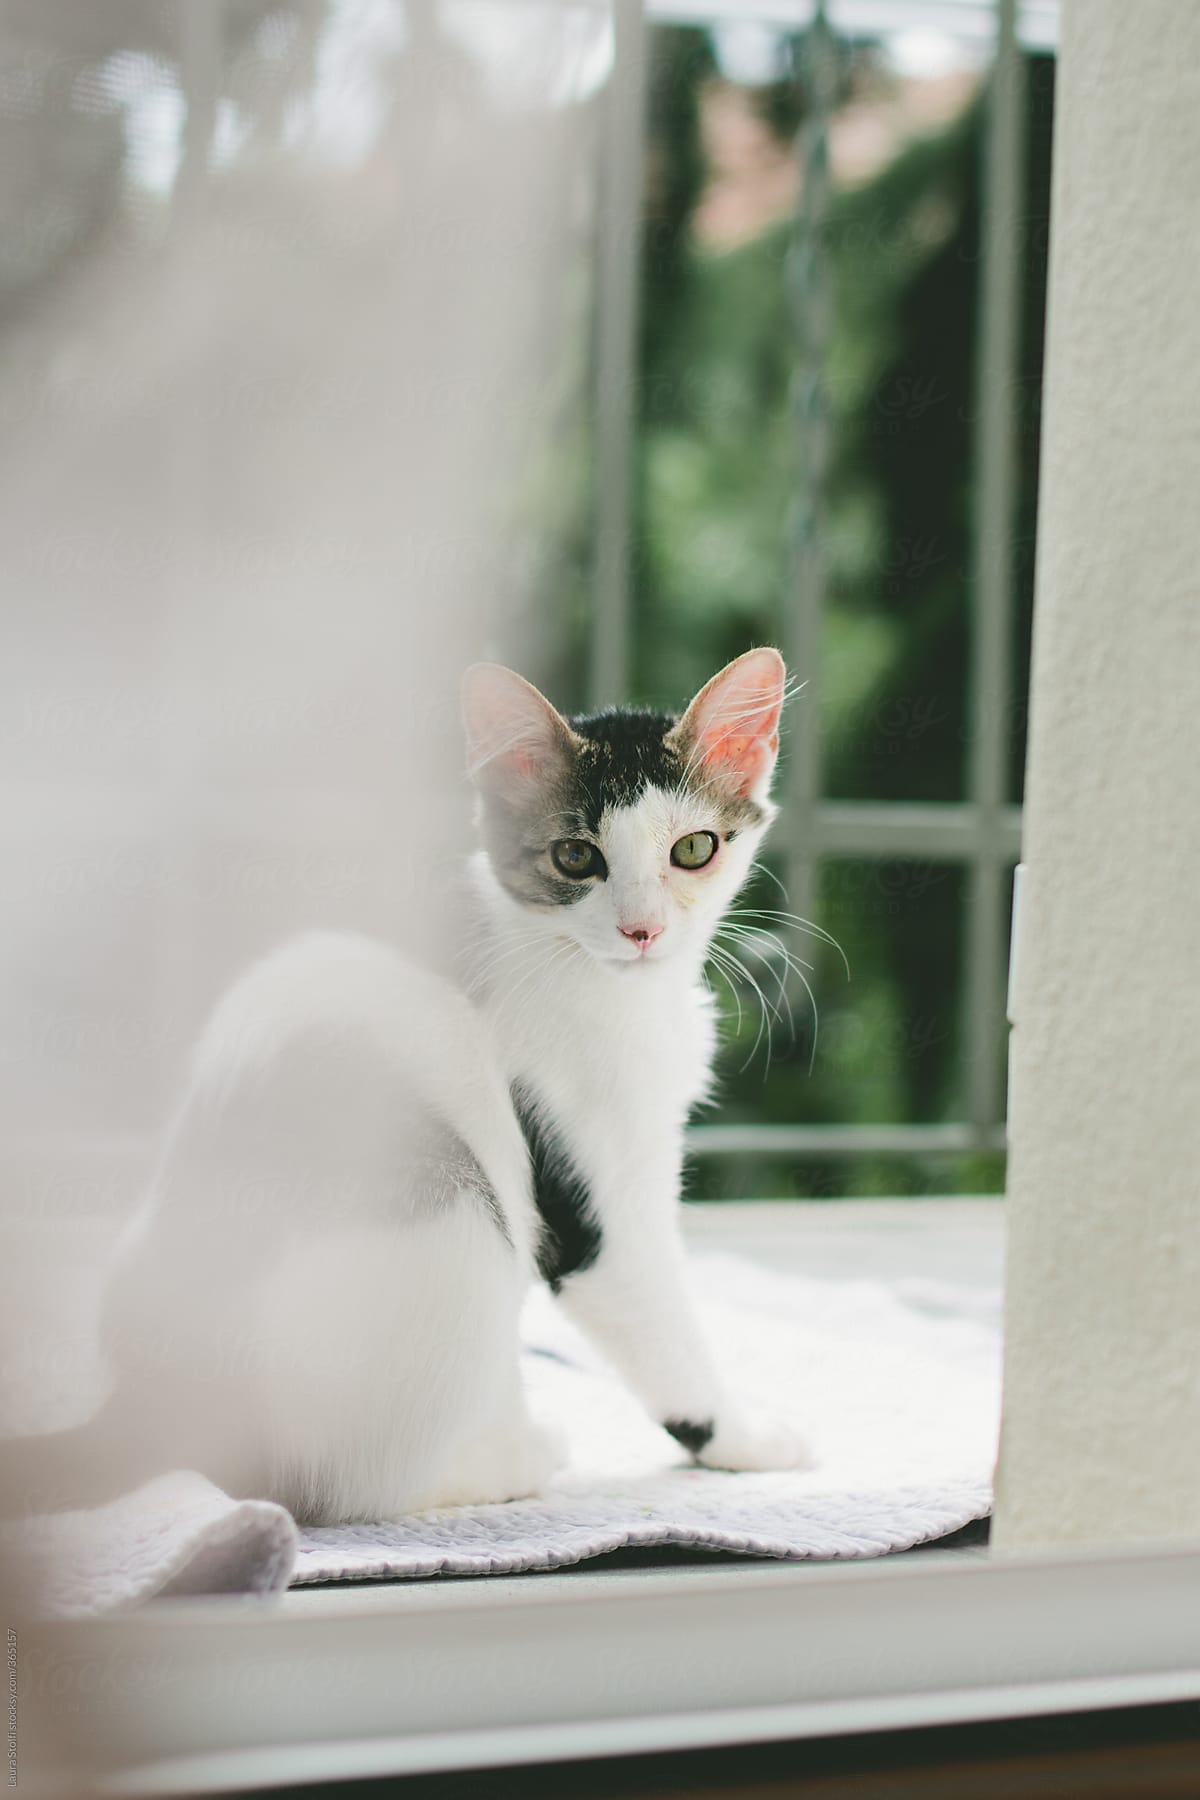 Kitty cat sits out behind mosquito net and looks straight at the camera